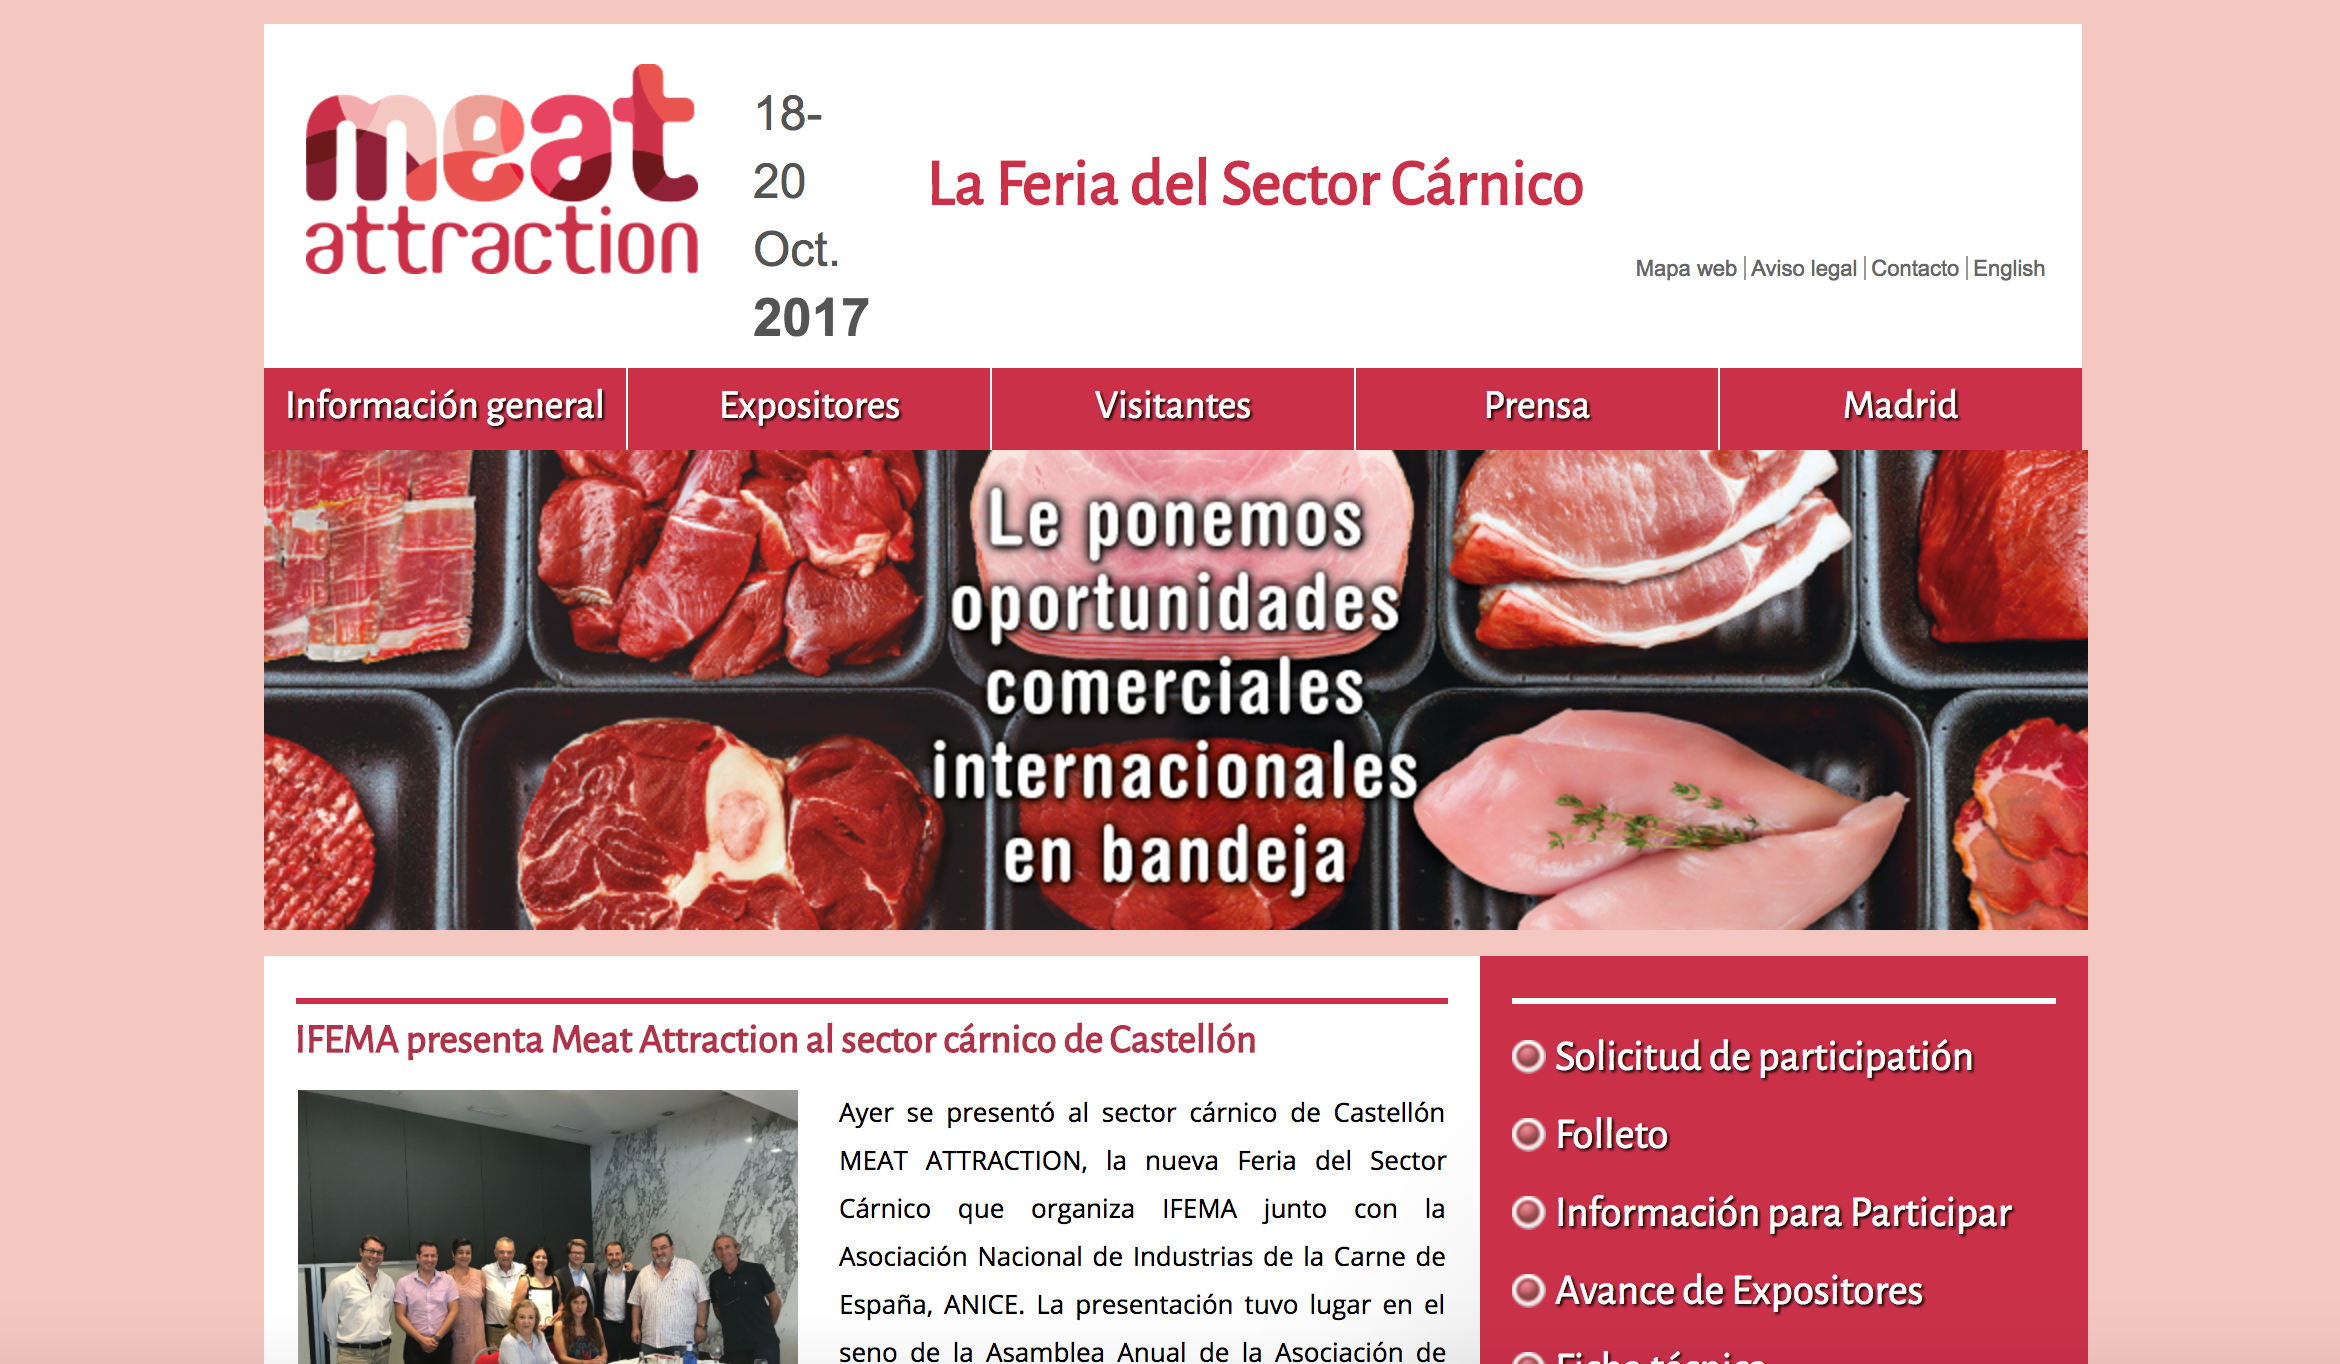 1st fair for the meat sector in Madrid